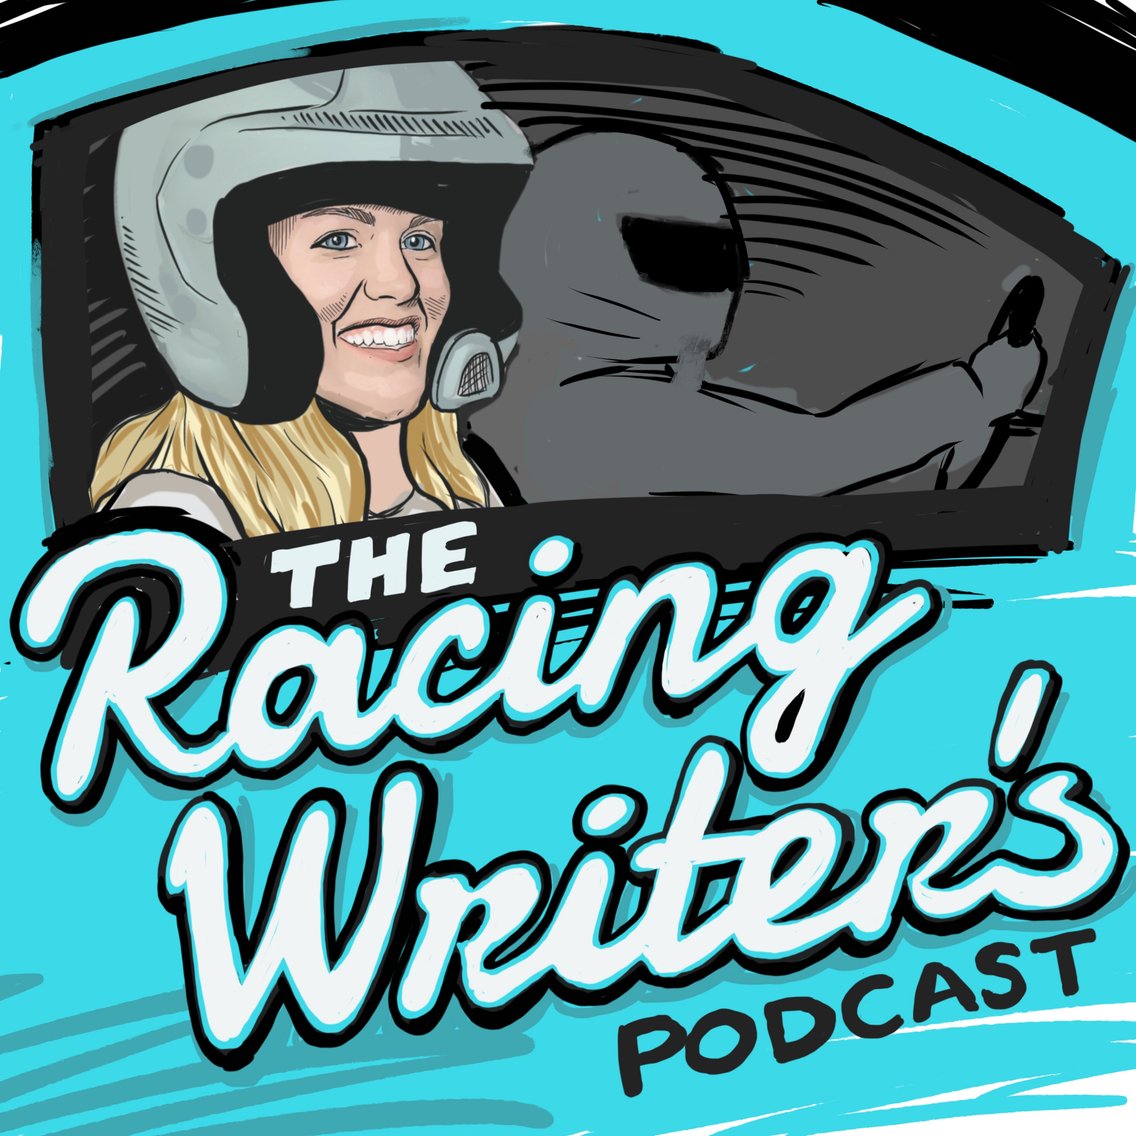 The Racing Writer's Podcast - Cover Image